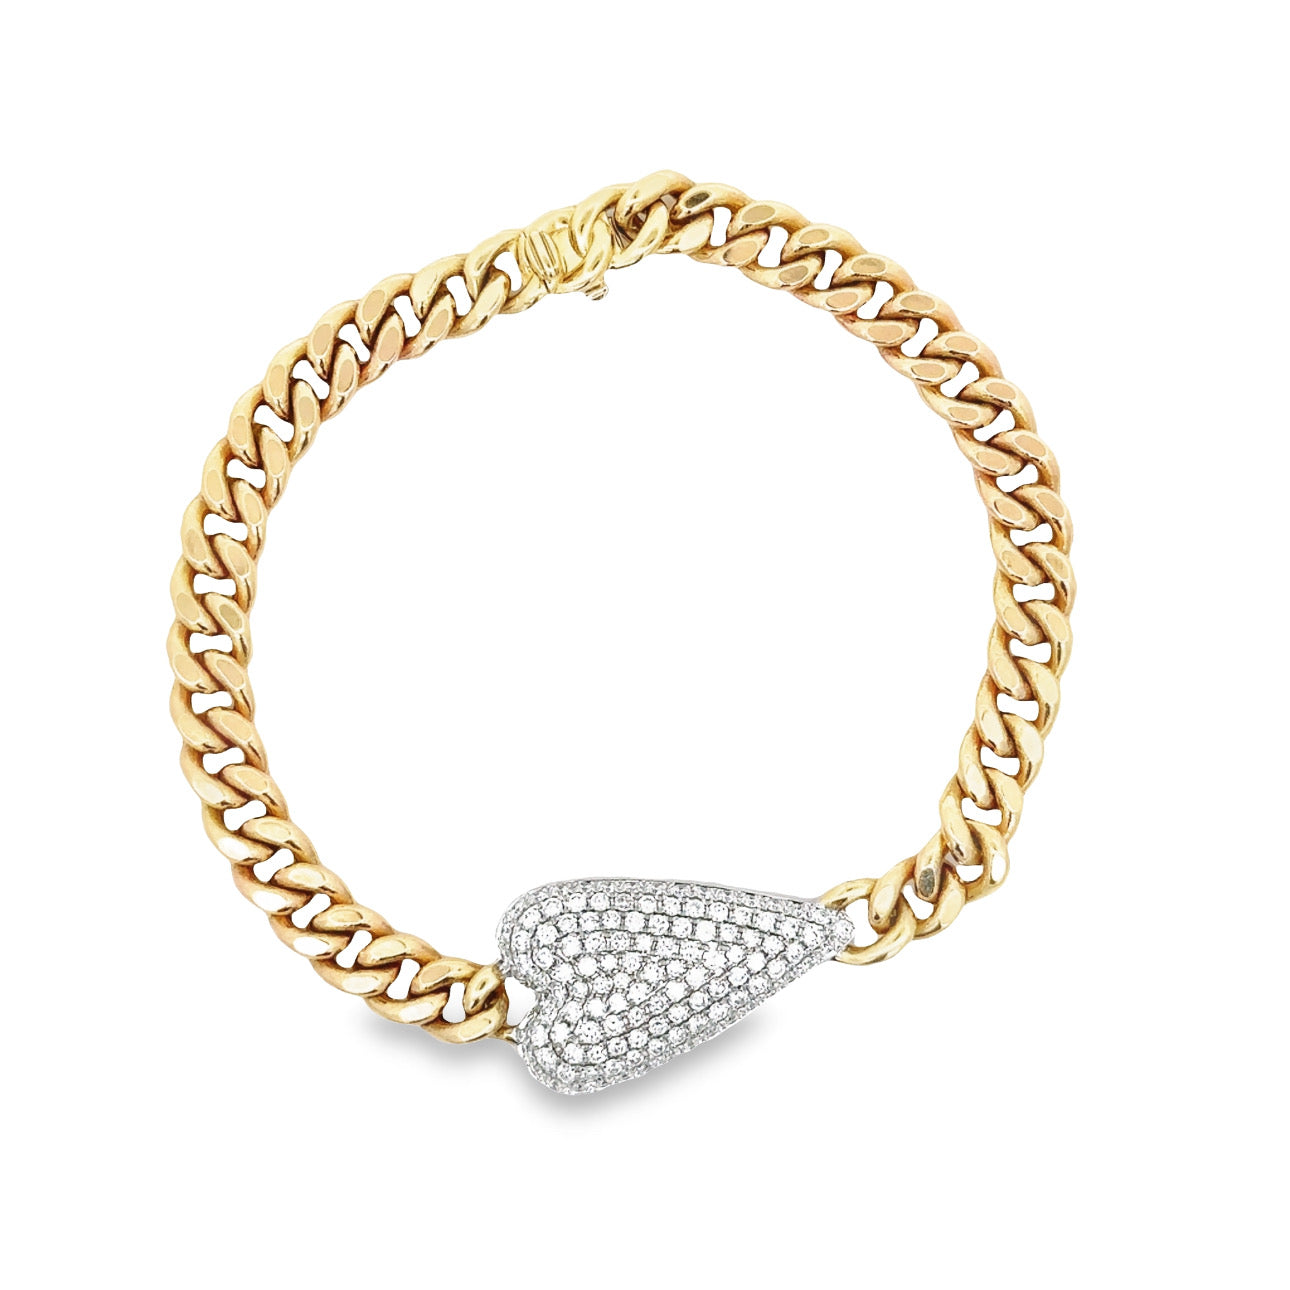 WD1242 14kt Gold Cuban Link Chain with Pave Diamond Heart Bracelet